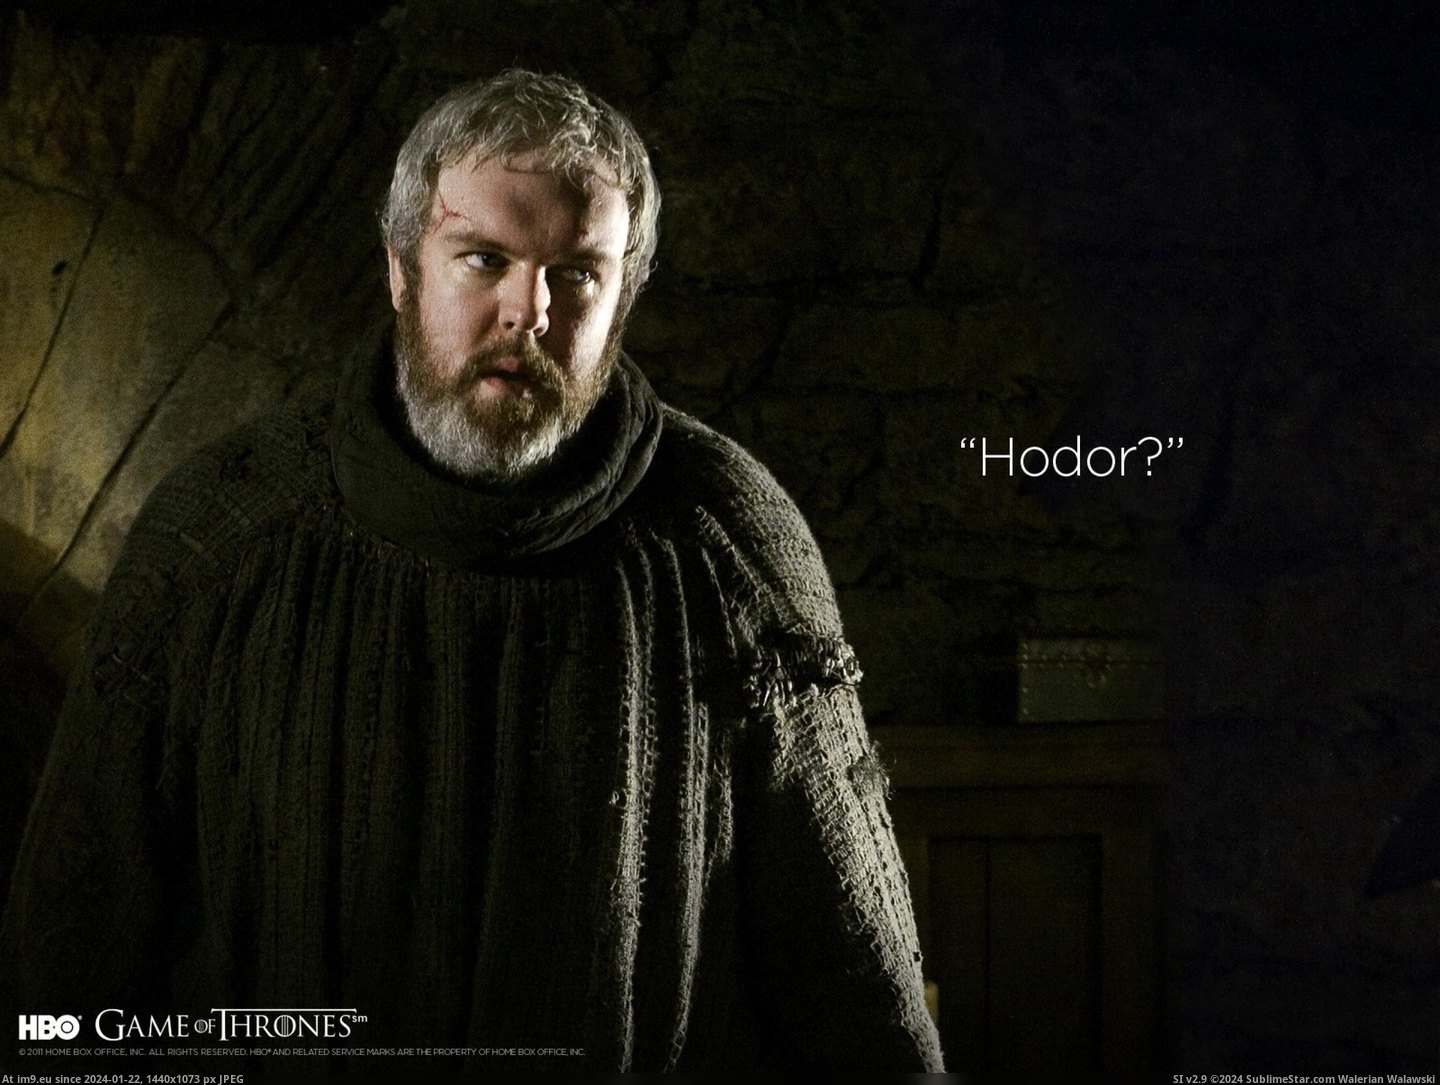  #Hodor  Hodor Pic. (Изображение из альбом Game of Thrones ART (A Song of Ice and Fire)))